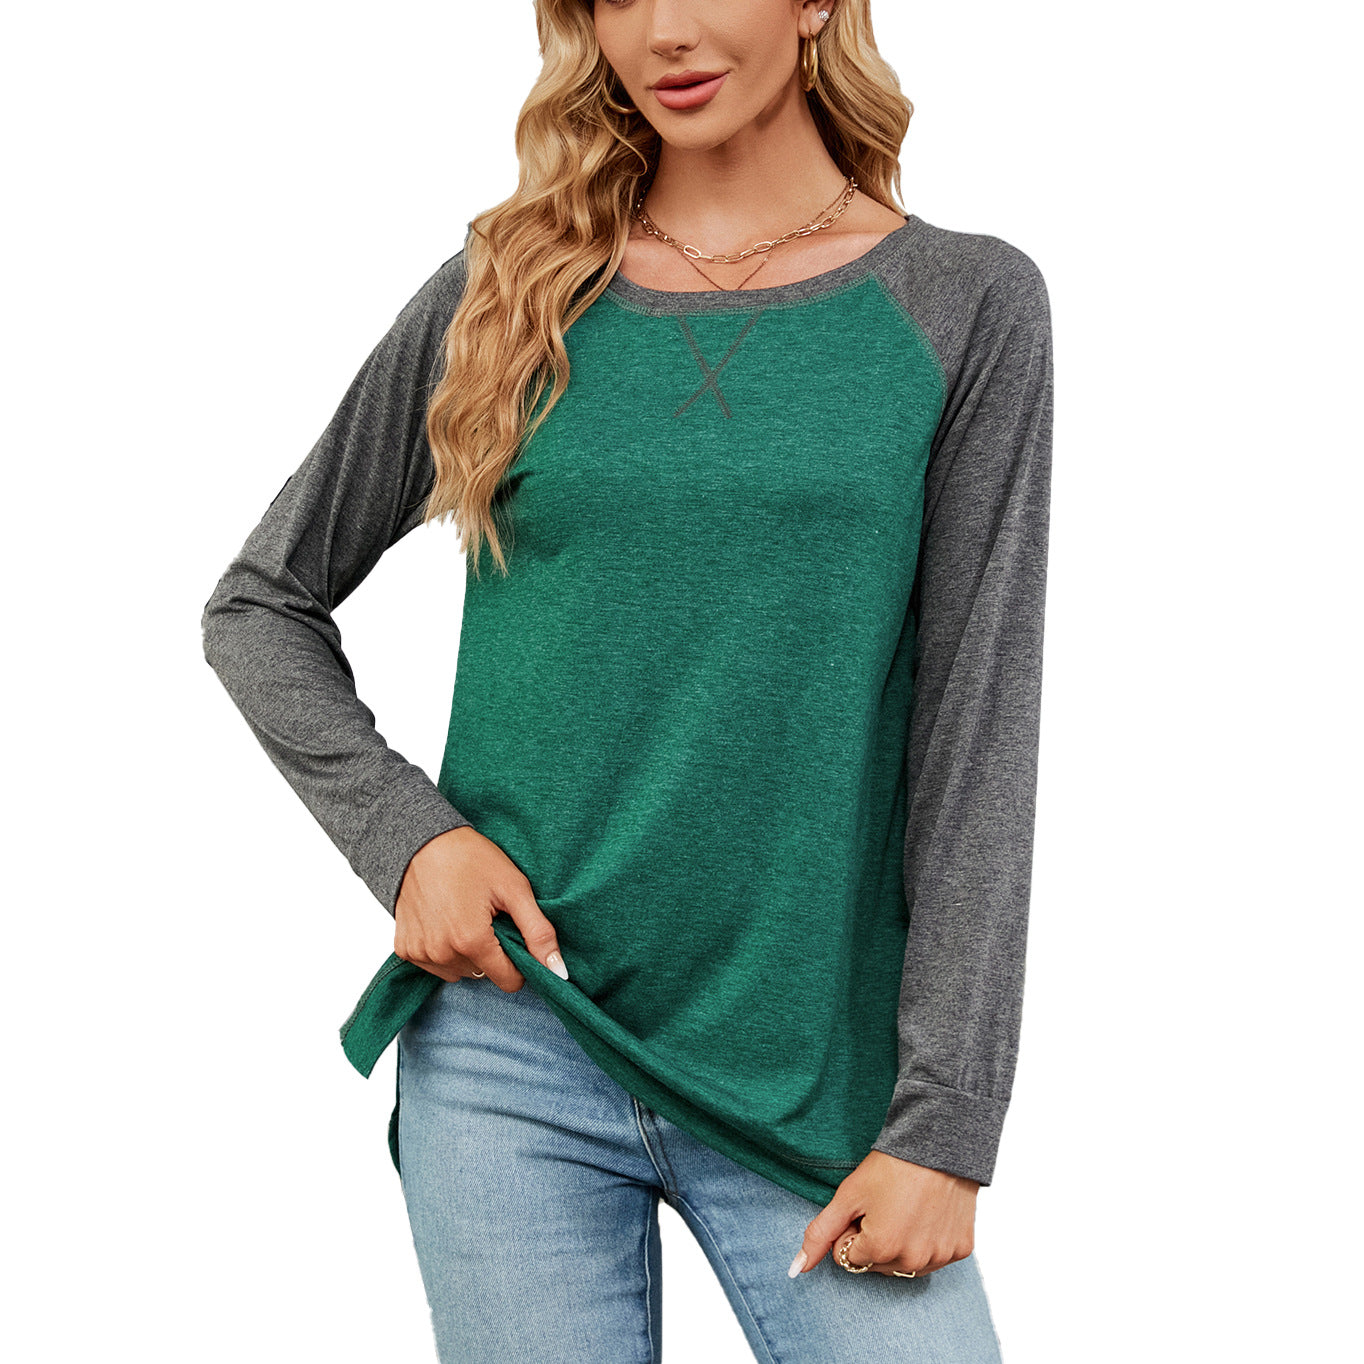 Women's Round Neck Contrast Color Loose Long-sleeved Blouses